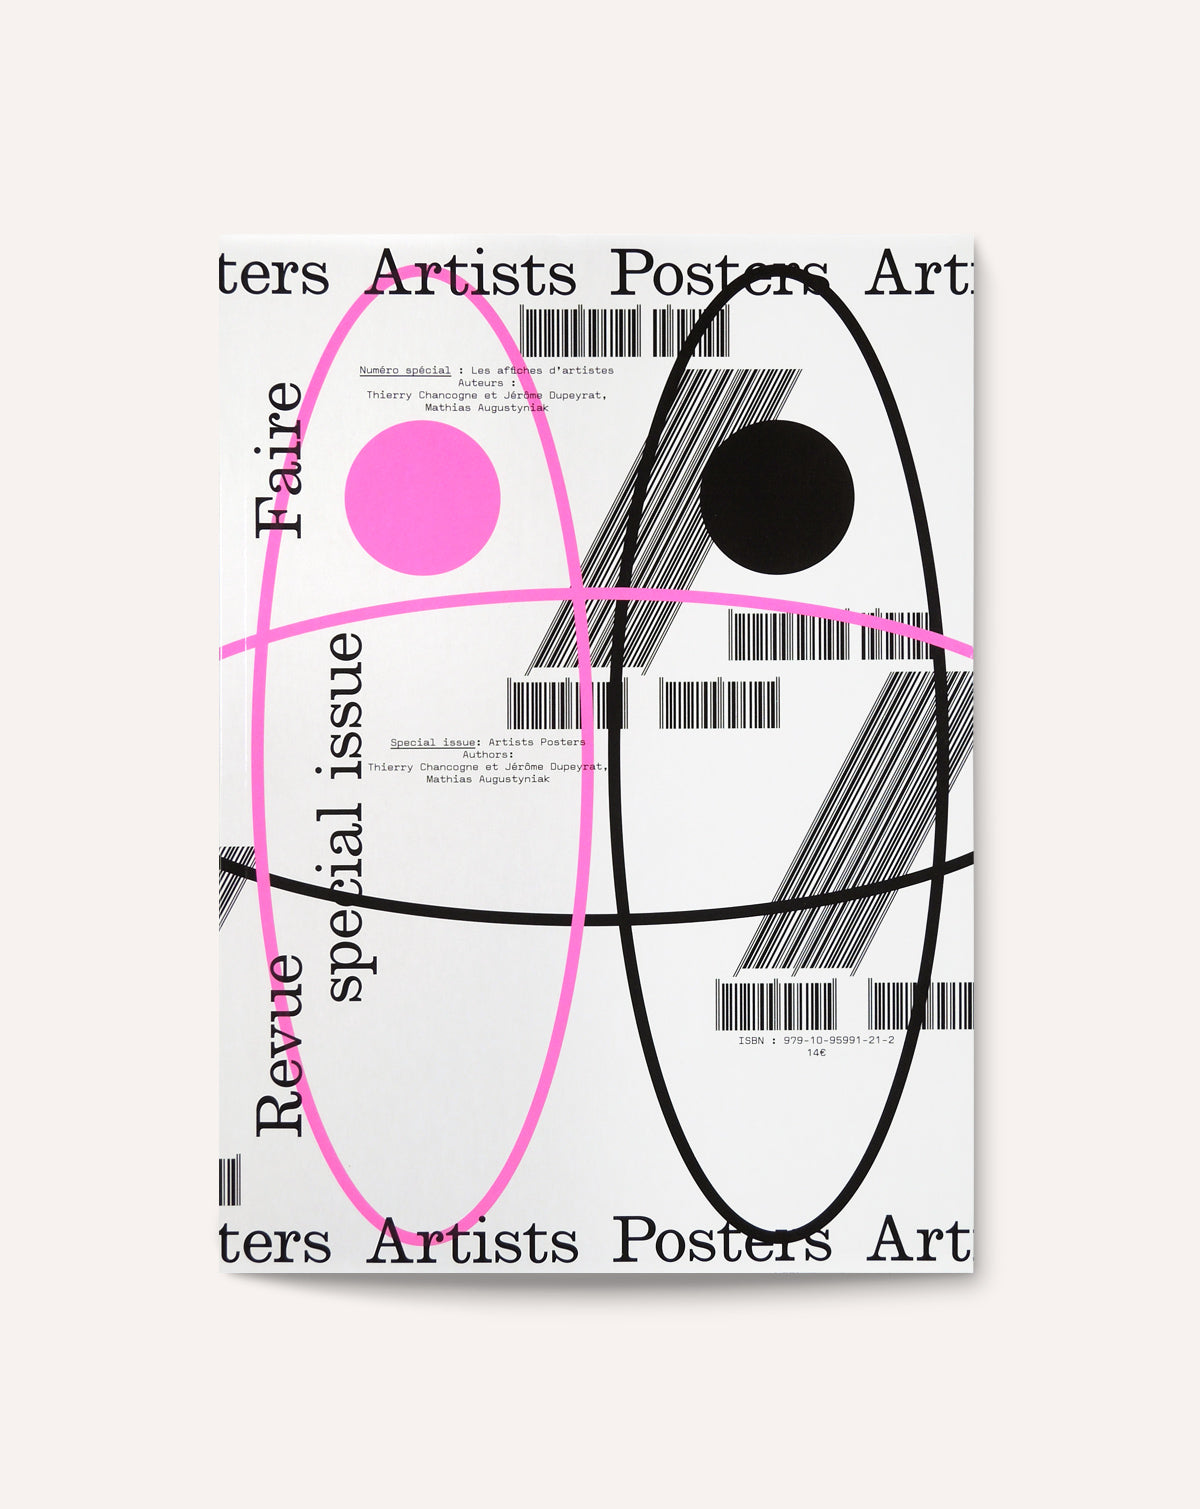 Revue Faire no. 22 (Special Issue: Artists Posters)